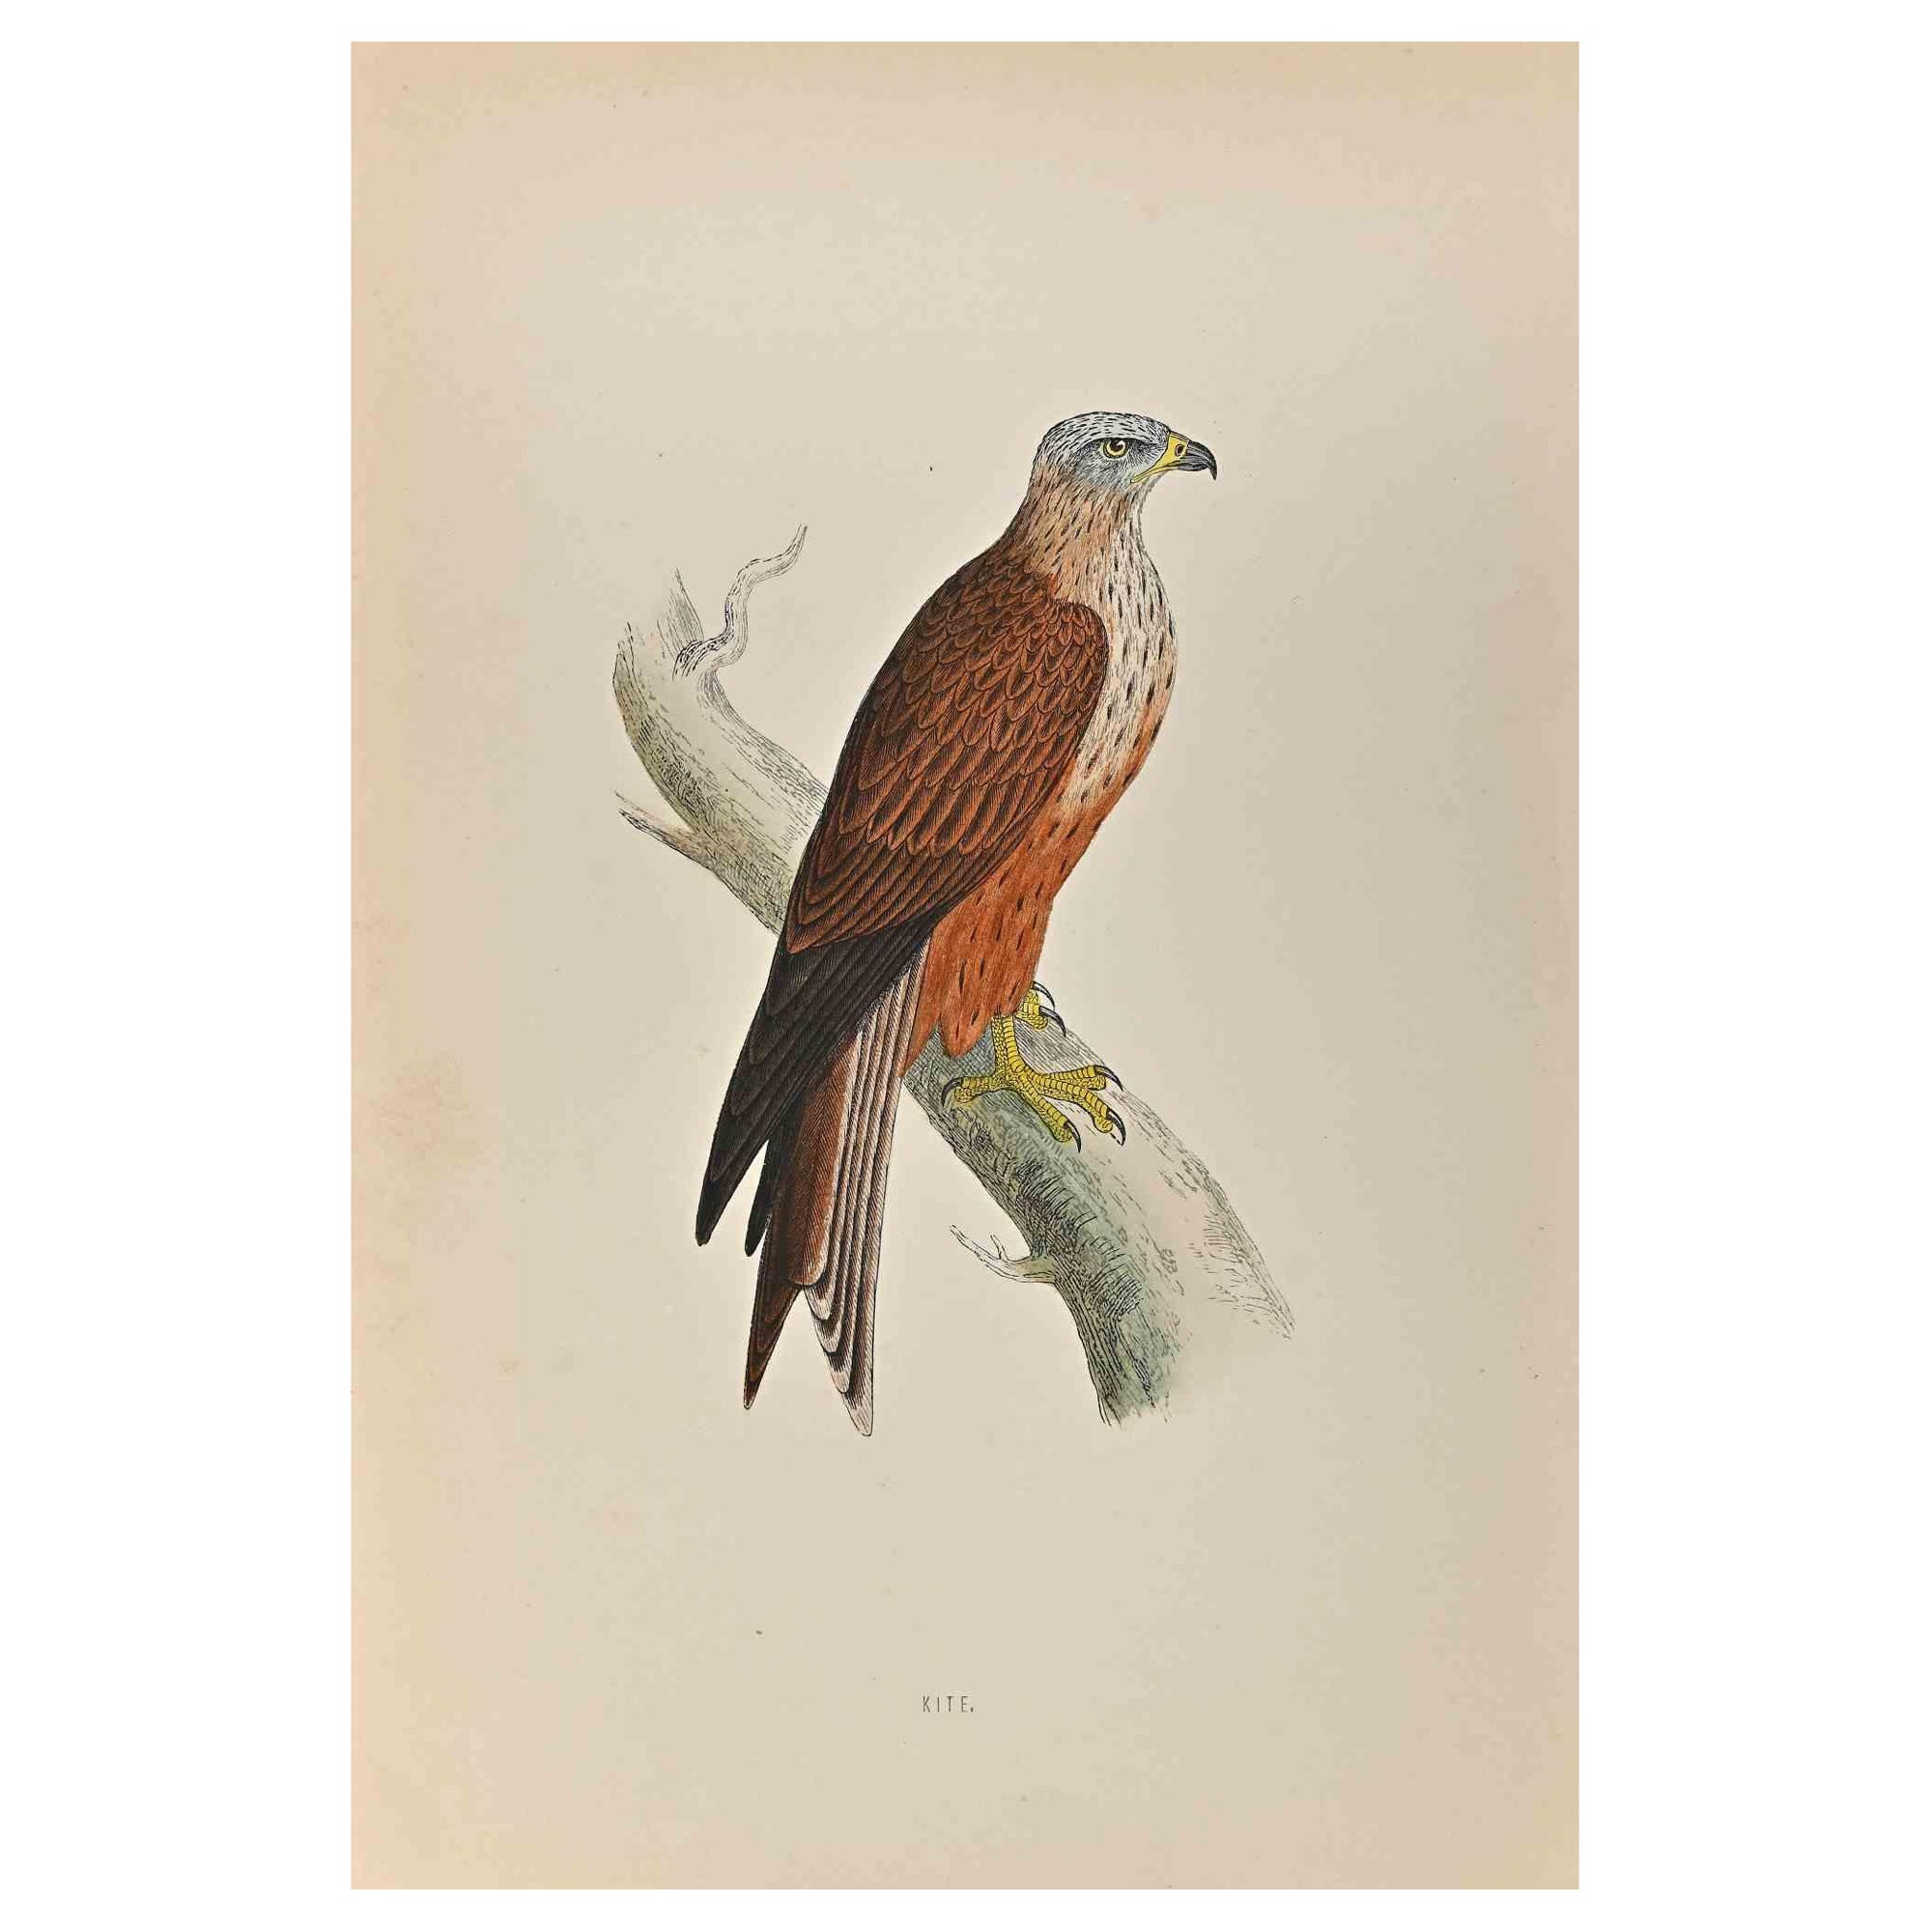 Kite is a modern artwork realized in 1870 by the British artist Alexander Francis Lydon (1836-1917) . 

Woodcut print, hand colored, published by London, Bell & Sons, 1870.  Name of the bird printed in plate. This work is part of a print suite